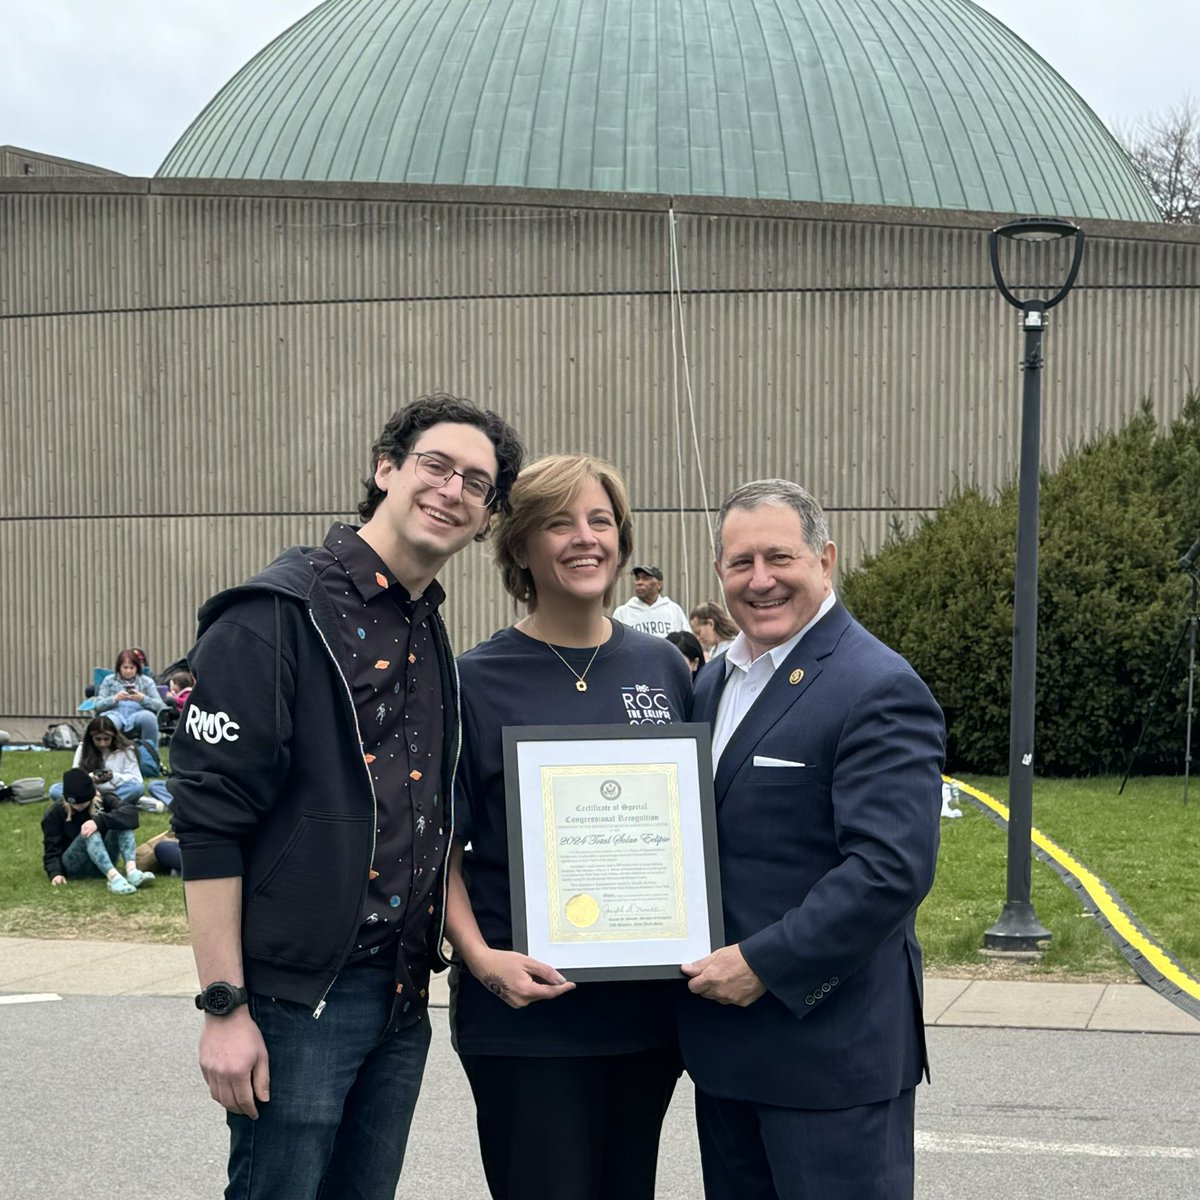 Honored to present a Certificate of Congressional Recognition to Hillary Olson, Dan Schneiderman, and everyone at @rocRMSC for their incredible work to make Rochester's eclipse celebrations a success! Grateful for all you do to inspire curiosity and learning in our community.